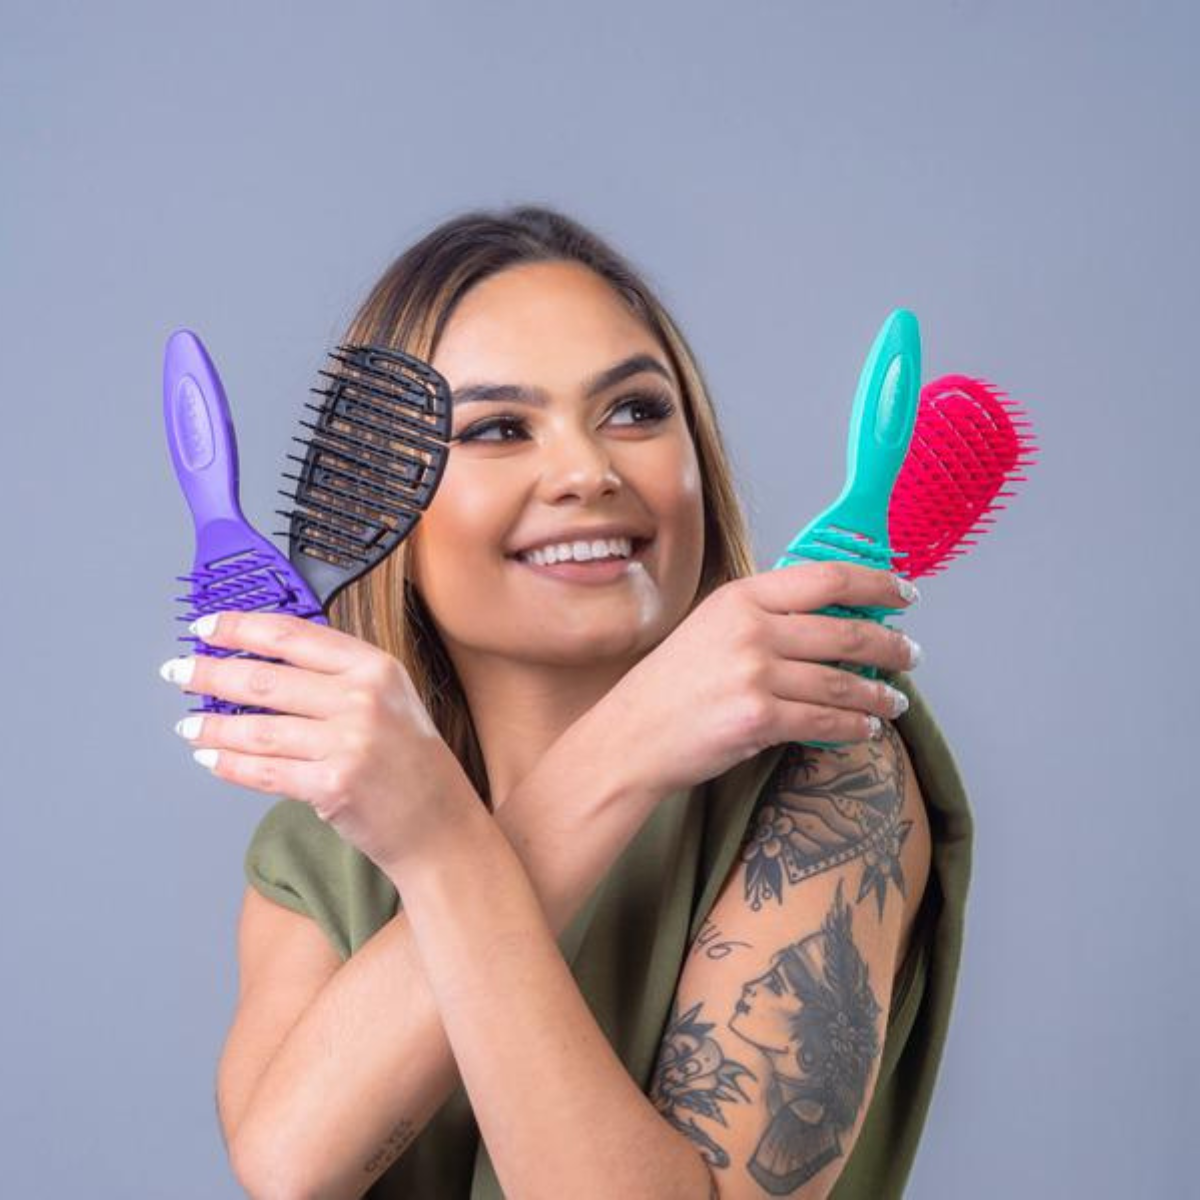 Dompel Maya Hair Brush Set - 4 Piece Set (Green, Pink, Purple, Black) - Antistatic Brush for All Hair Types. - Buy professional cosmetics dedicated to hair removal